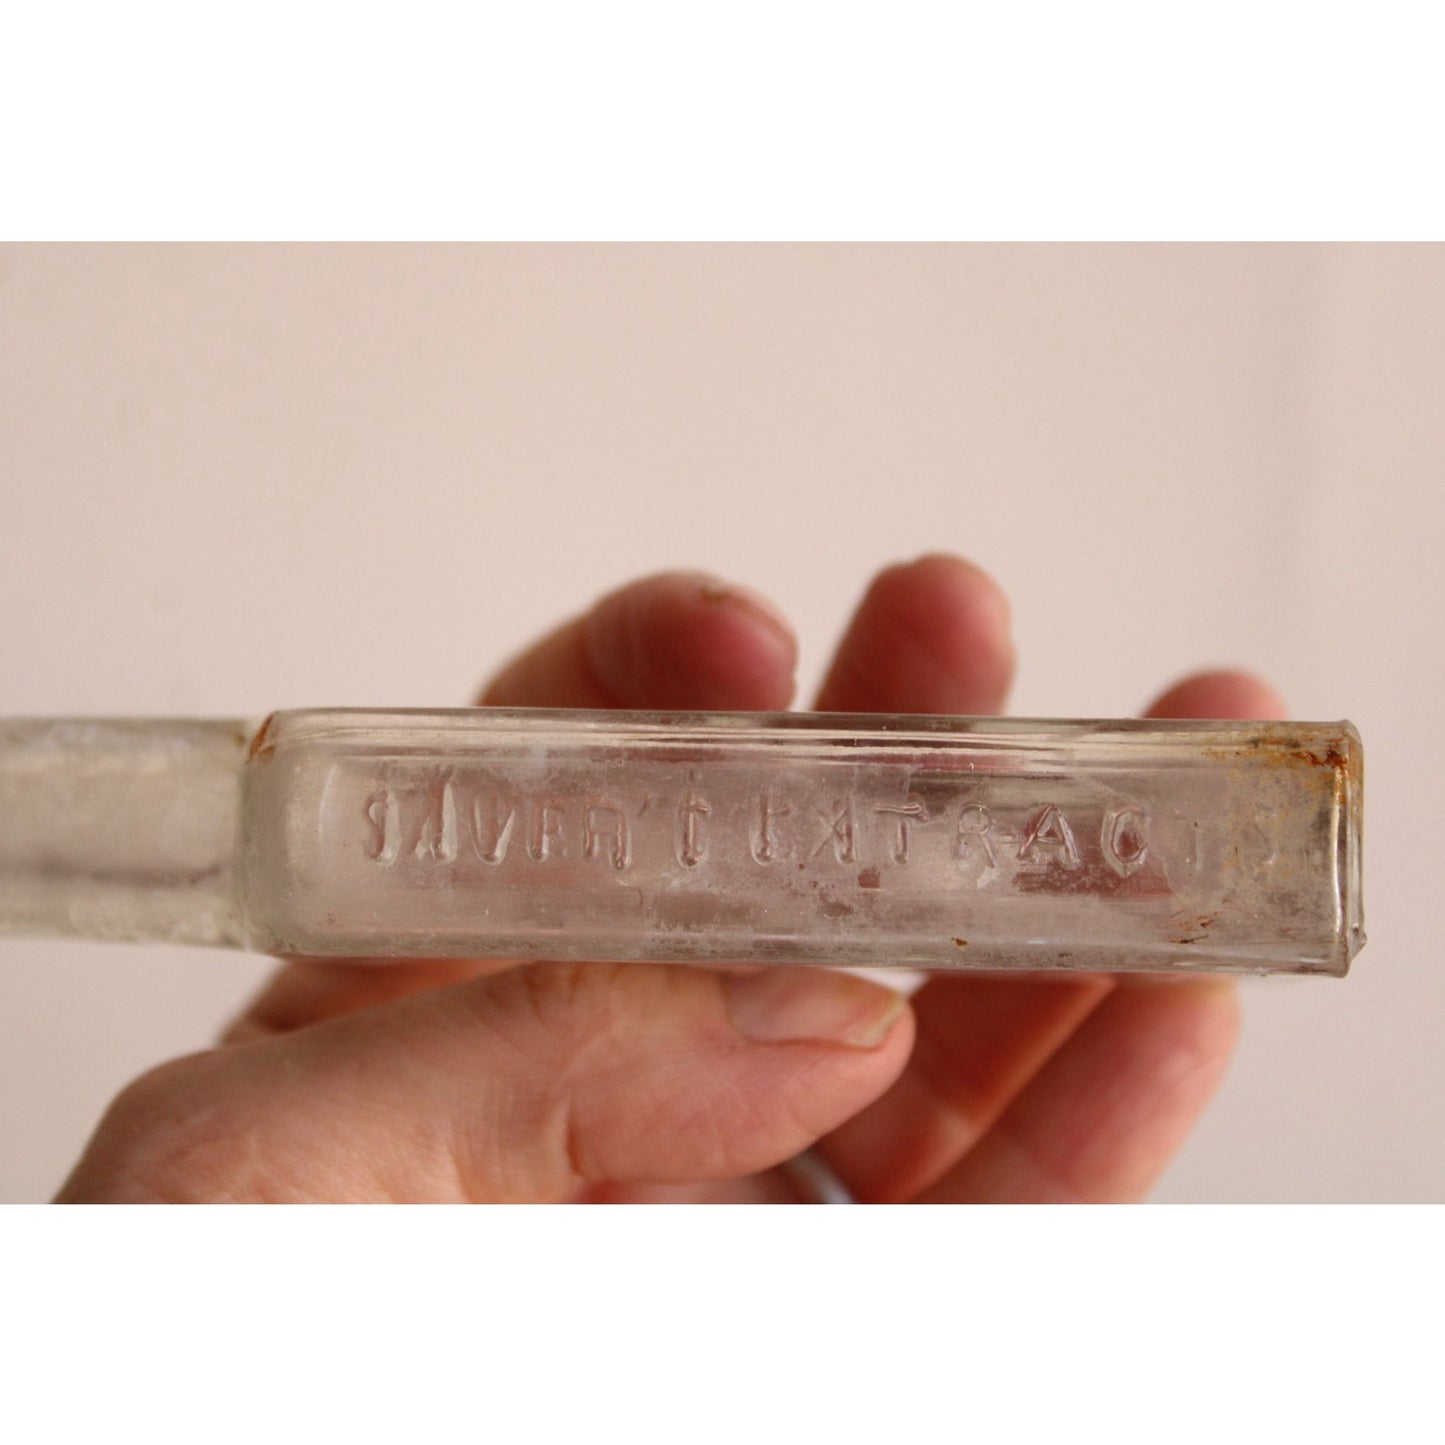 Vintage 1890s 1900s Sauer's Extracts Clear Glass Antique Bottle